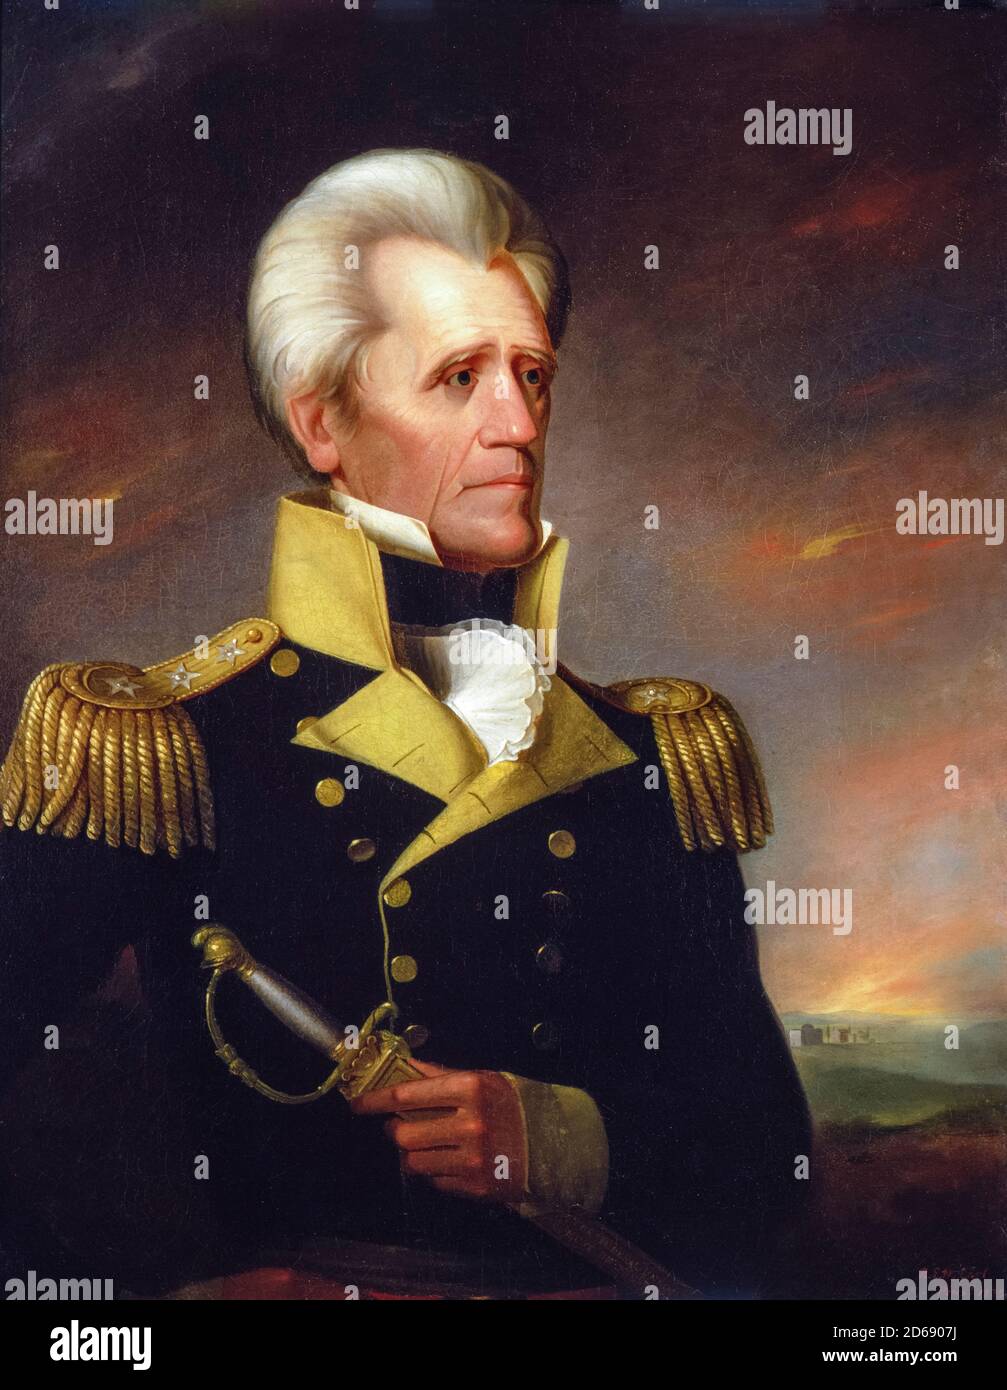 Andrew Jackson (1767-1845), American soldier and statesman who served as the seventh President of the United States, portrait painting in military uniform by Ralph Eleaser Whiteside Earl, 1835 Stock Photo